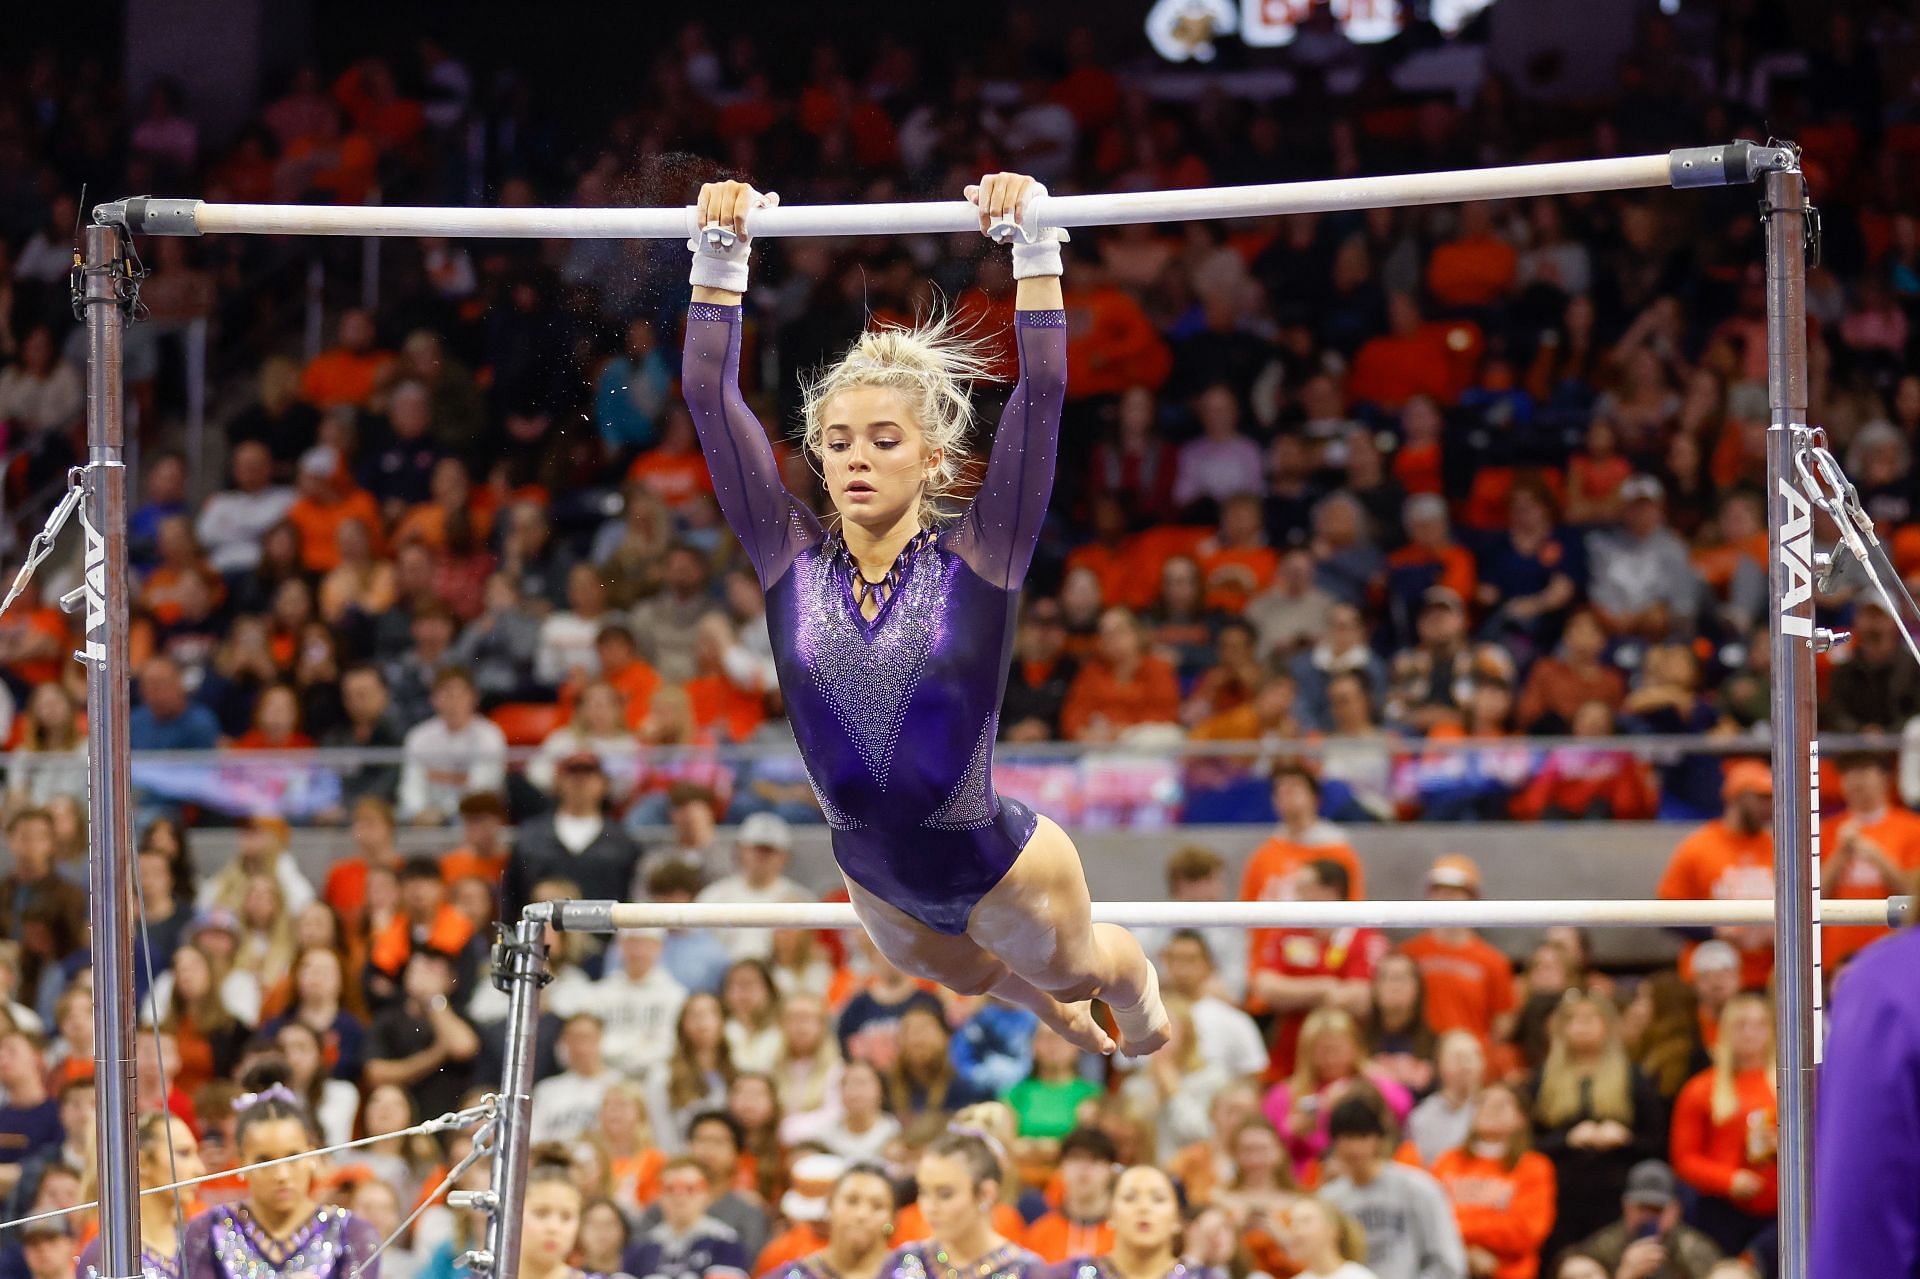 Olivia Dunne of LSU warms up on the uneven bars during a gymnastics meet